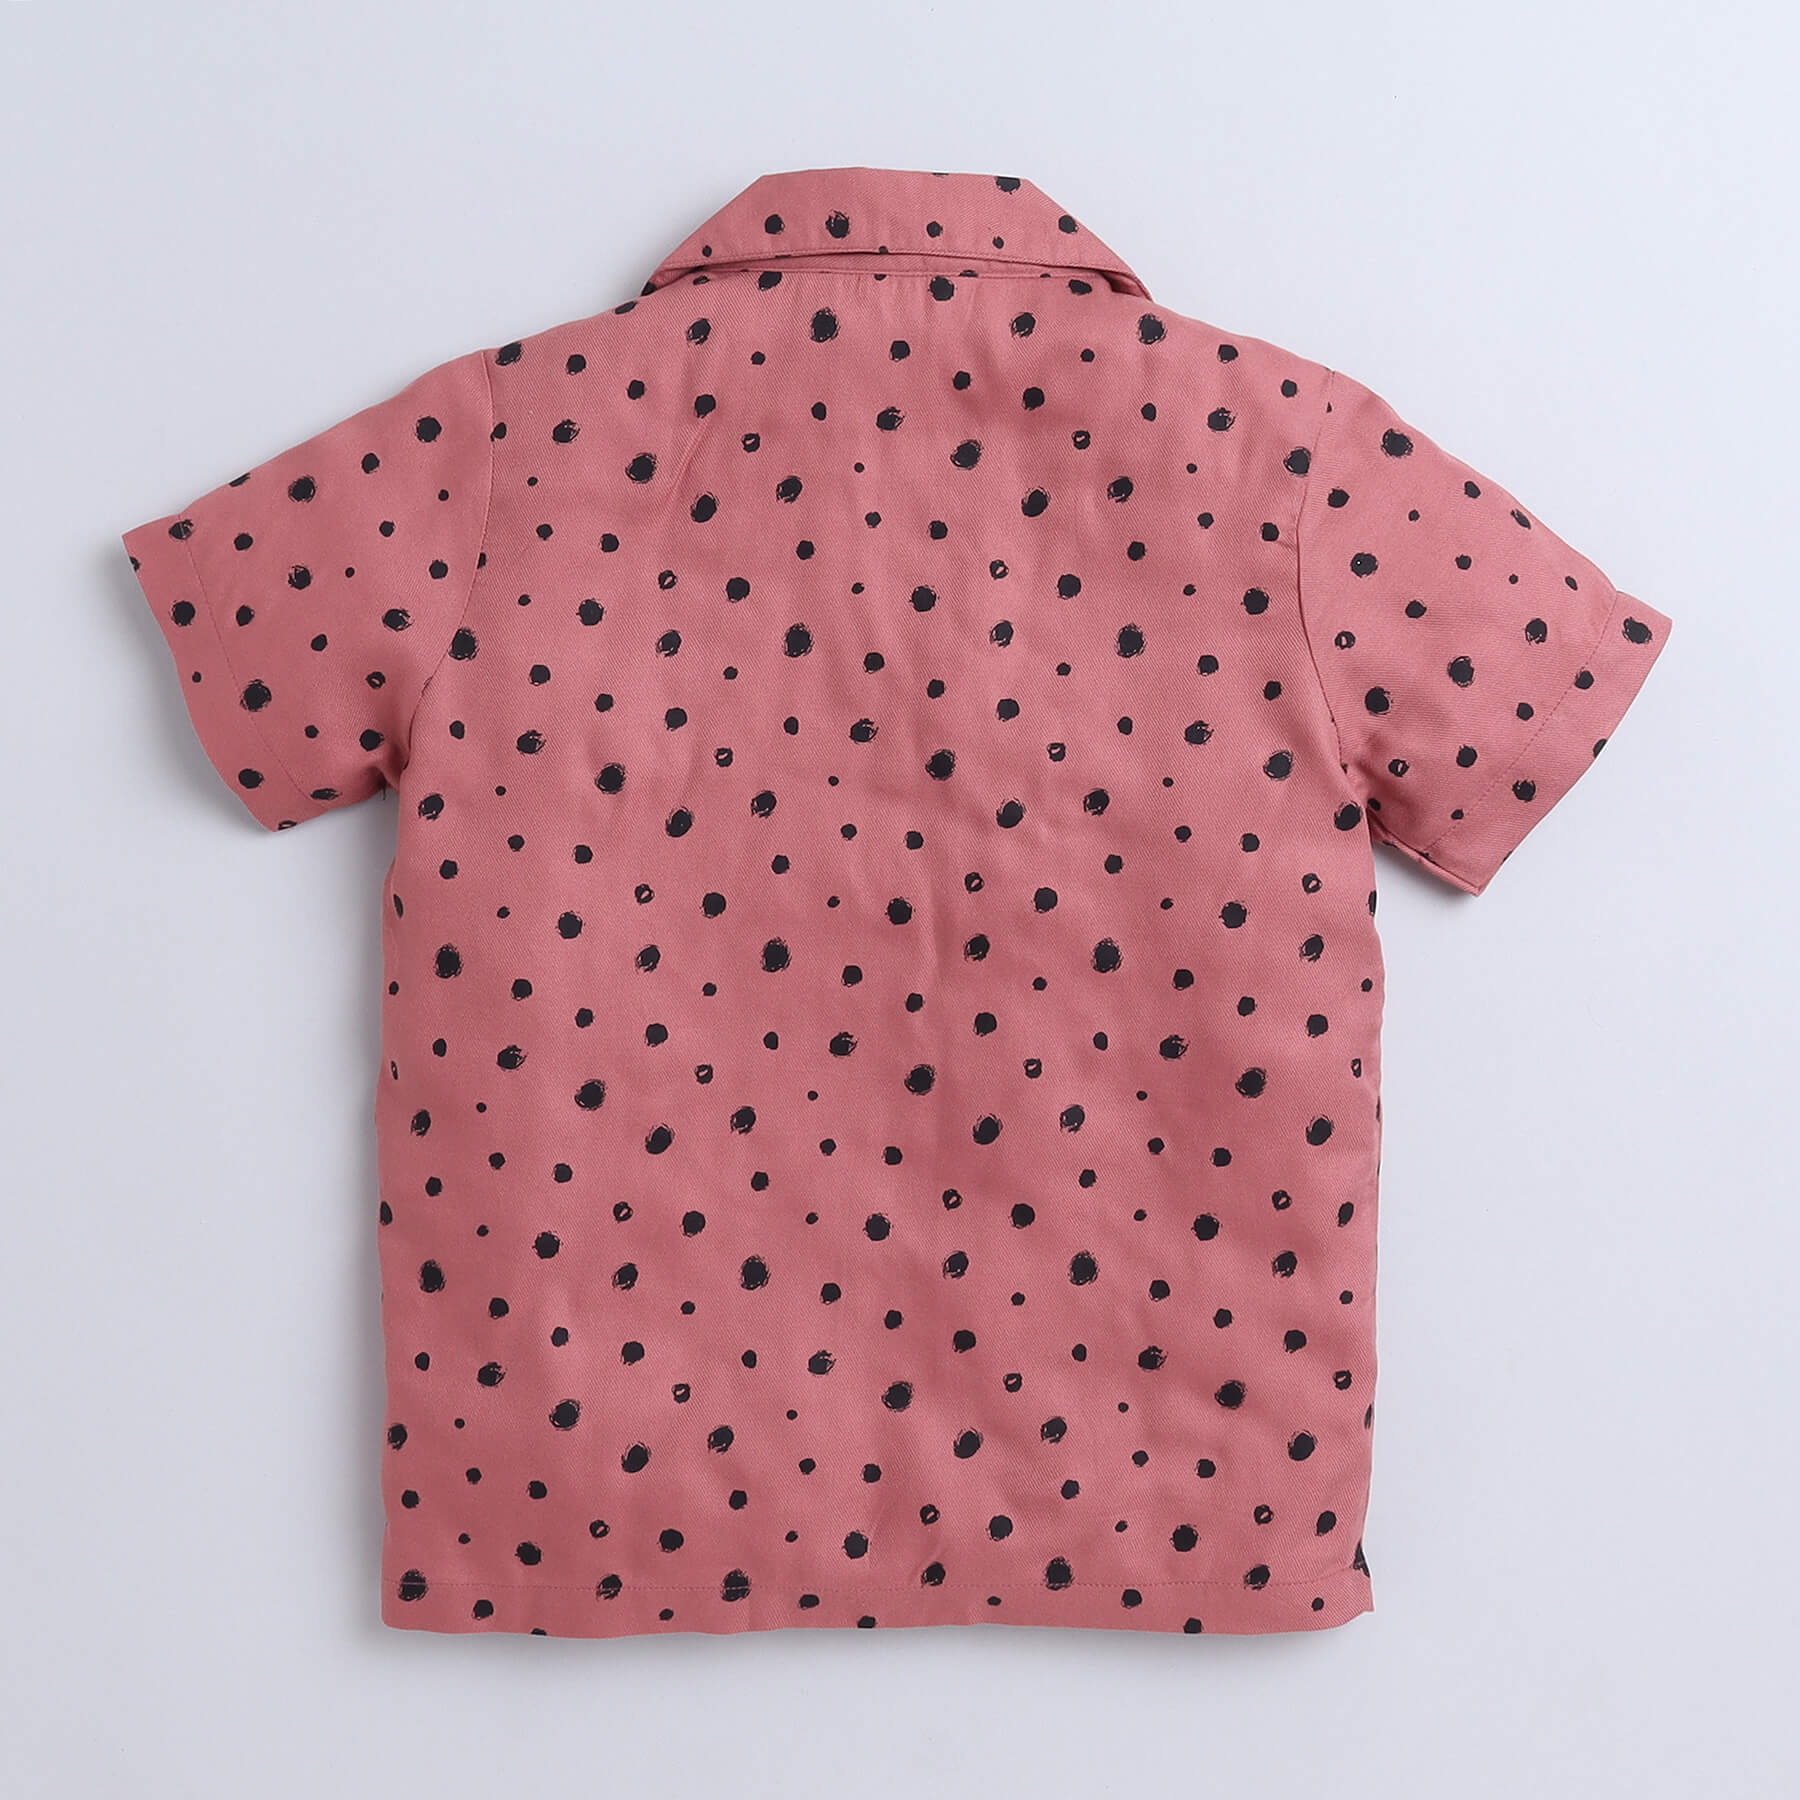 Taffykids Polka dots printed half sleeves shirt with attach tee and matching short set-Brown/Black